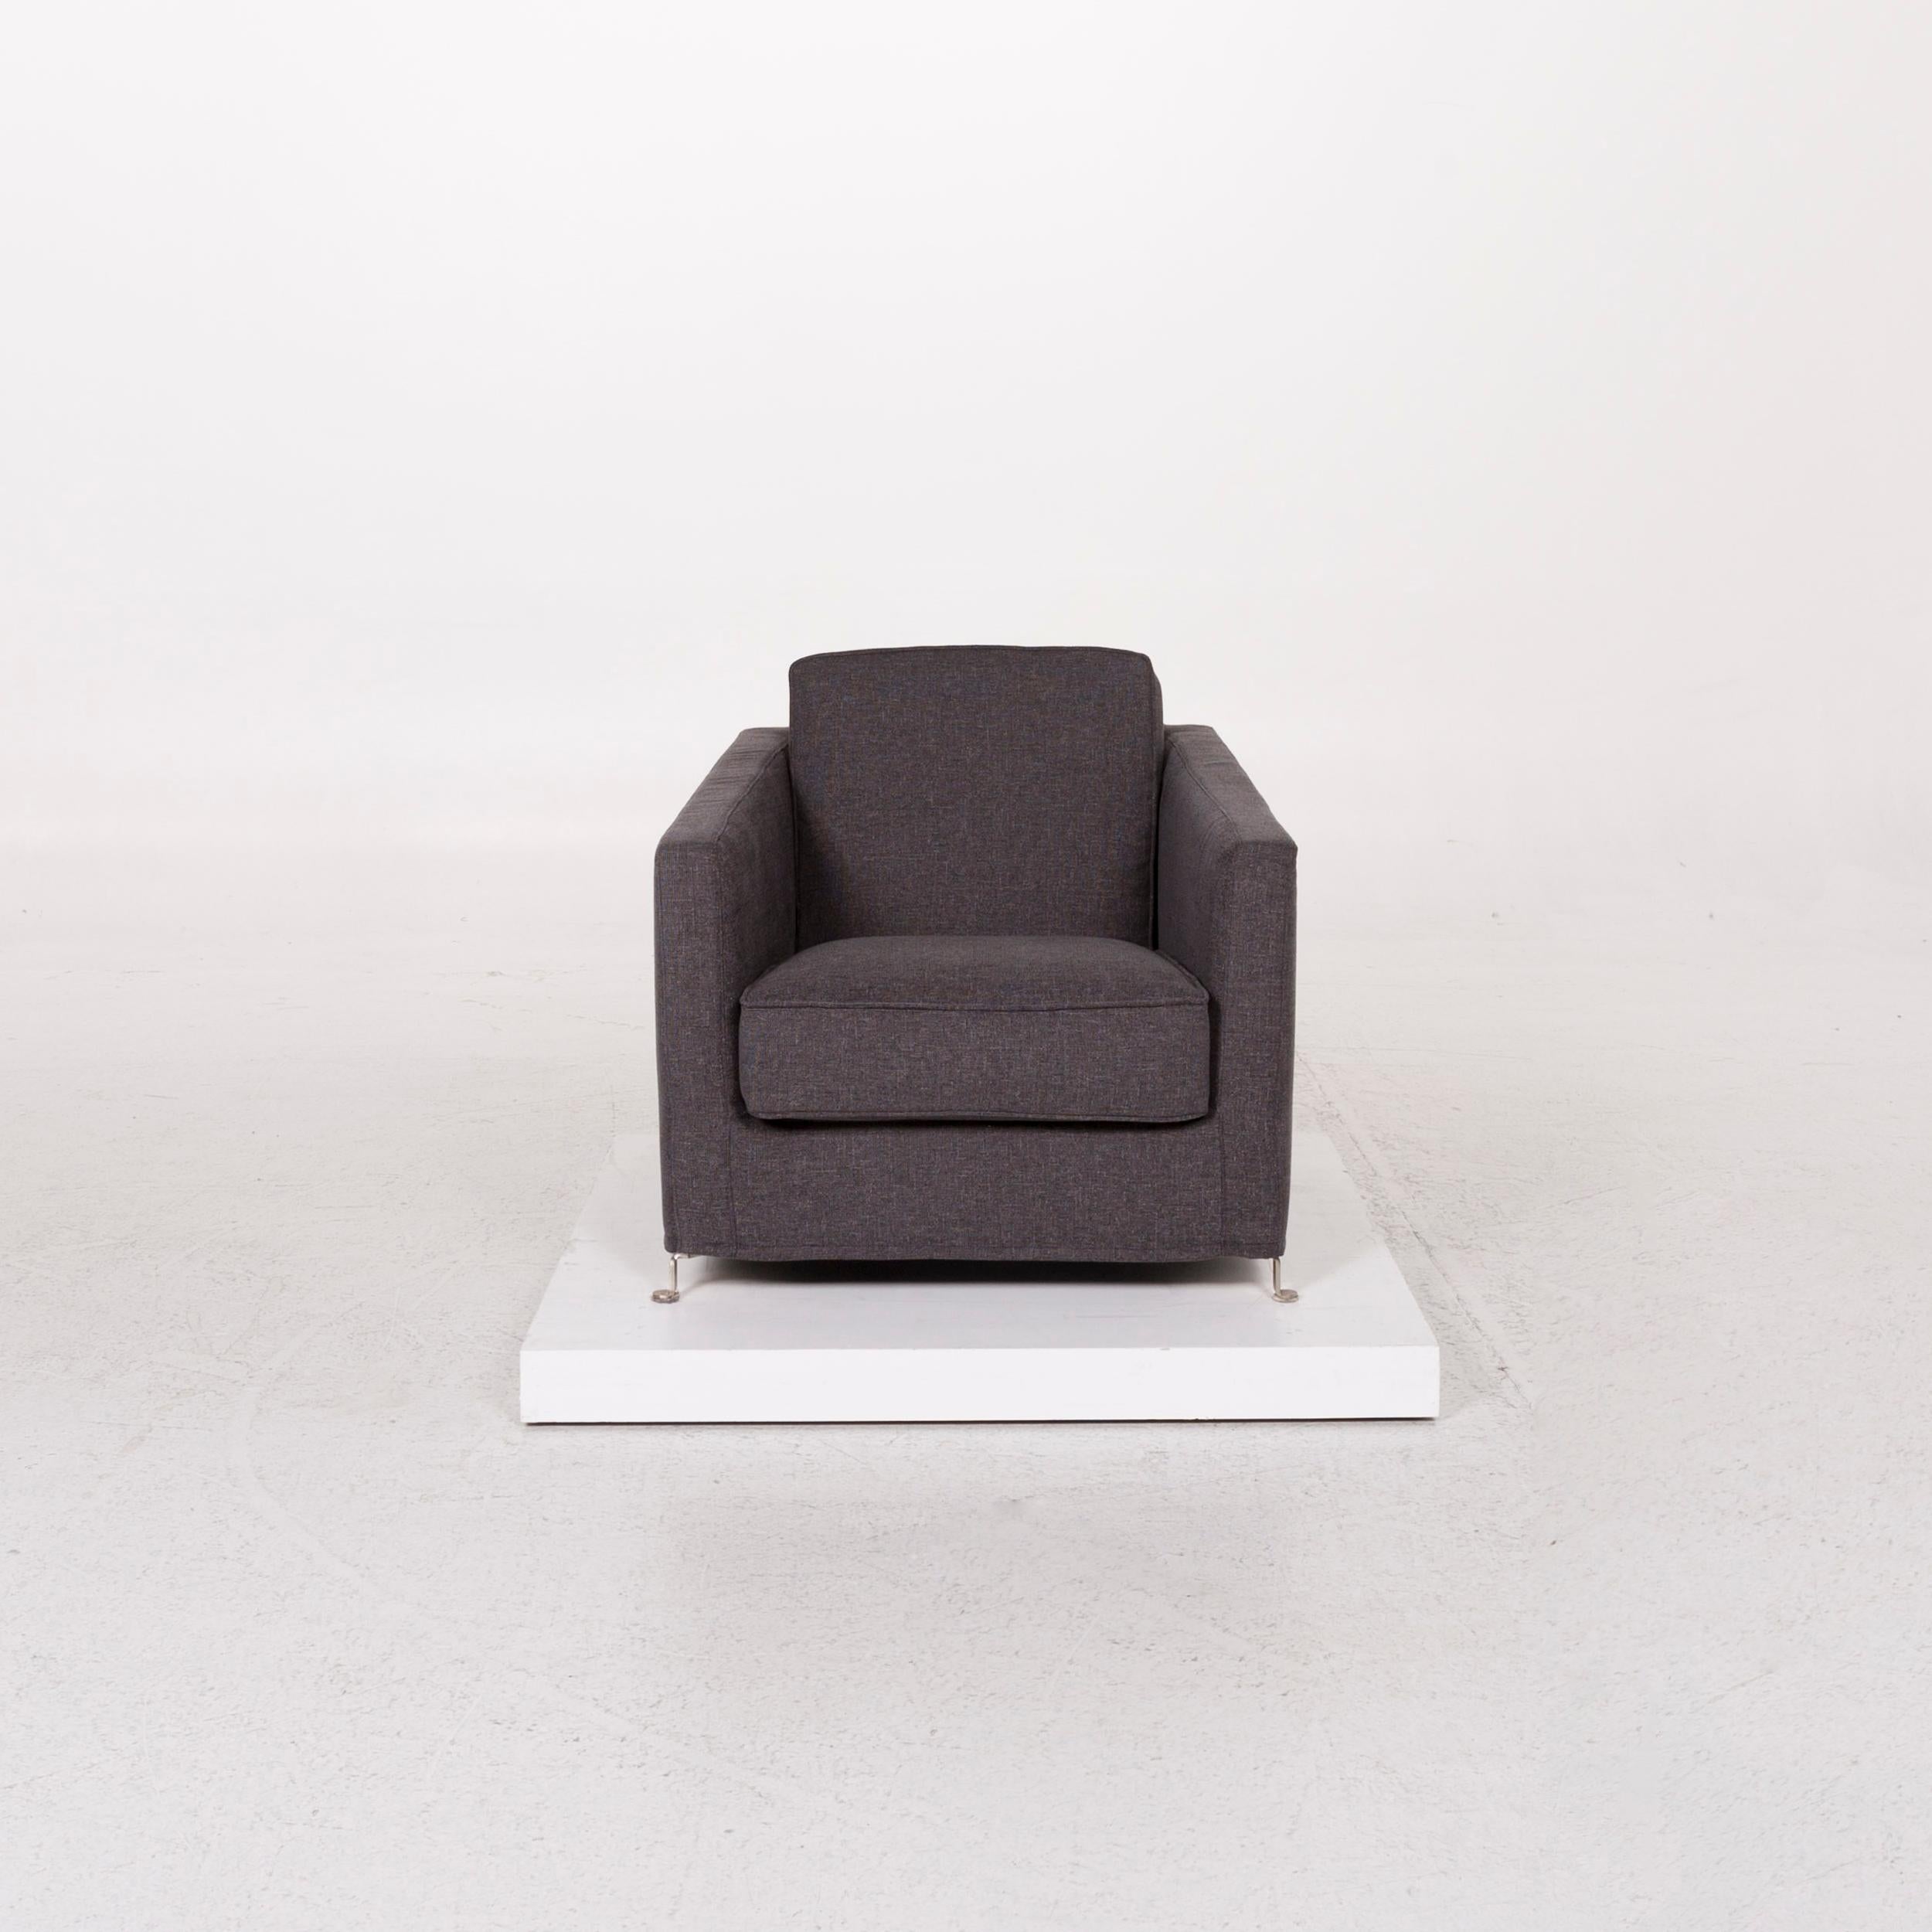 We bring to you a Flexform fabric armchair gray anthracite.
     
 

 Product measurements in centimeters:
 

Depth 89
Width 74
Height 69
Seat-height 40
Rest-height 55
Seat-depth 57
Seat-width 50
Back-height 35.